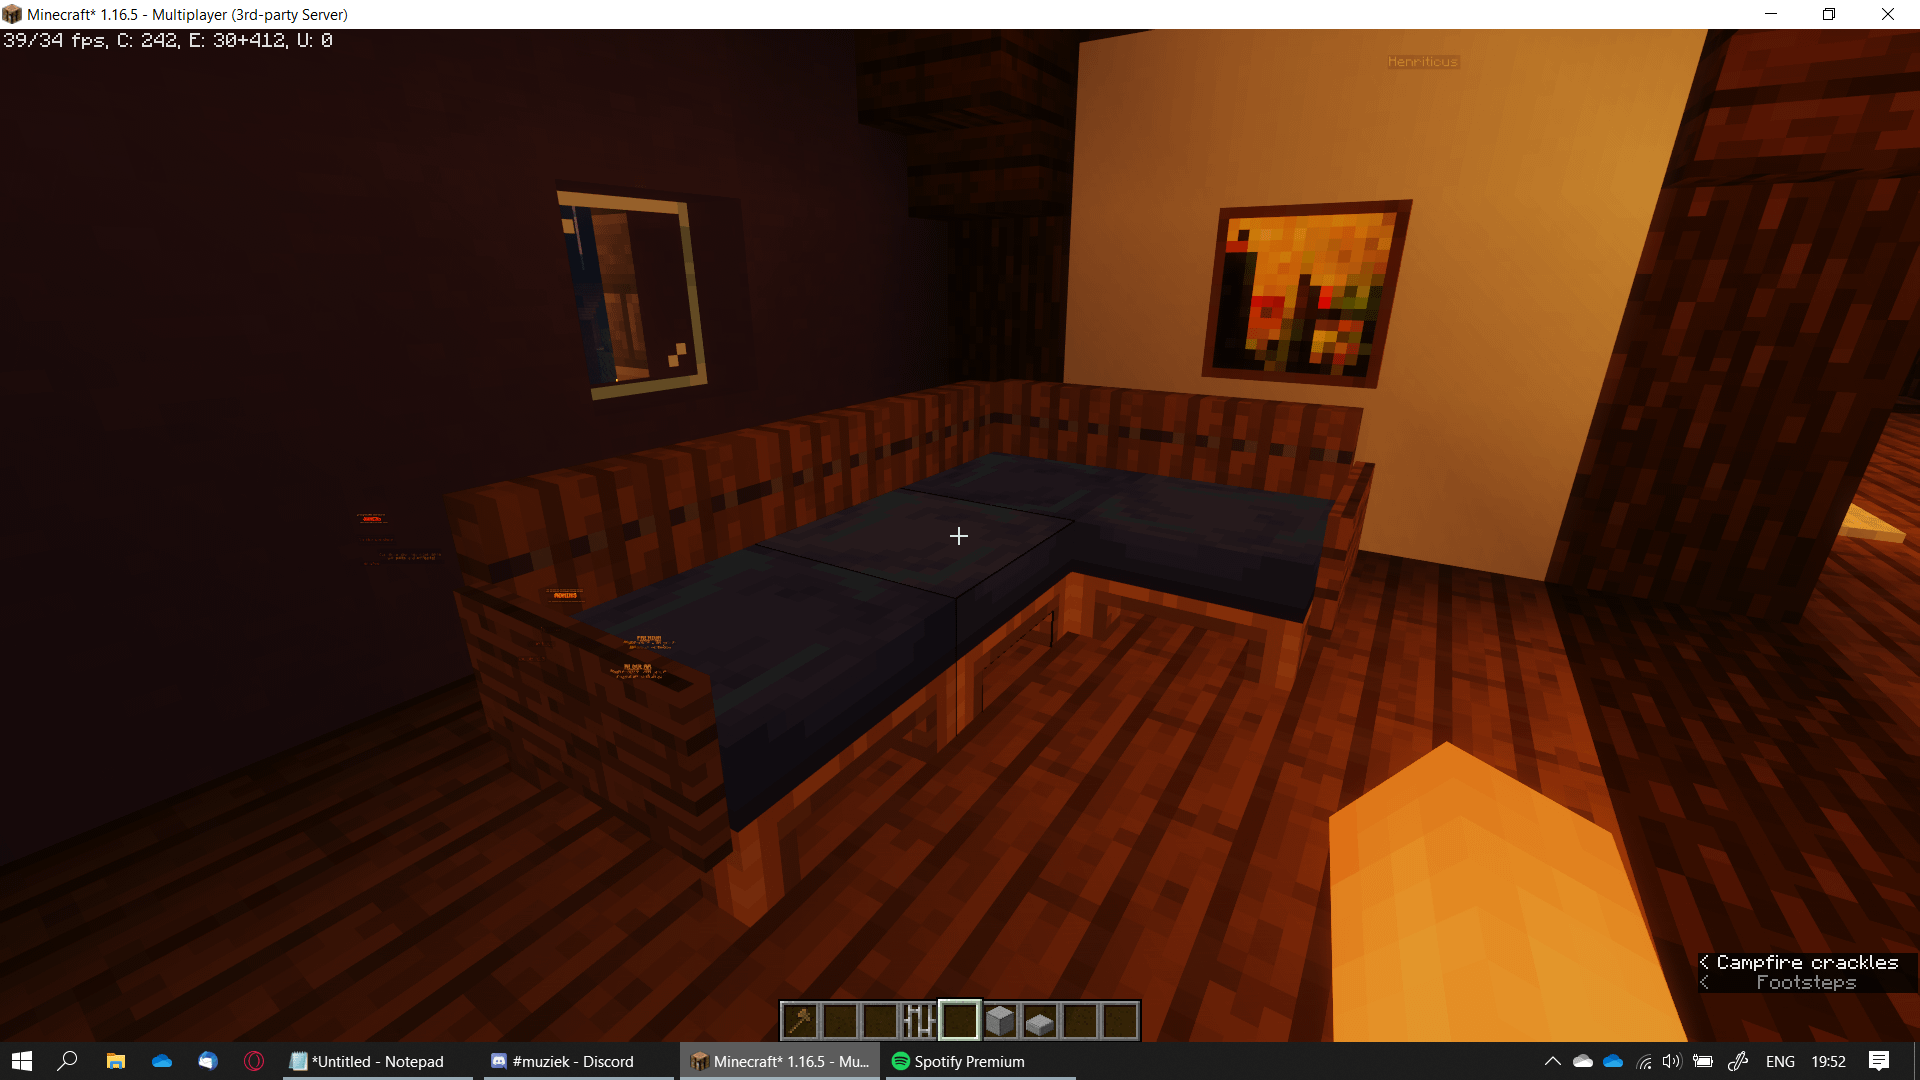 how to make a couch on minecraft